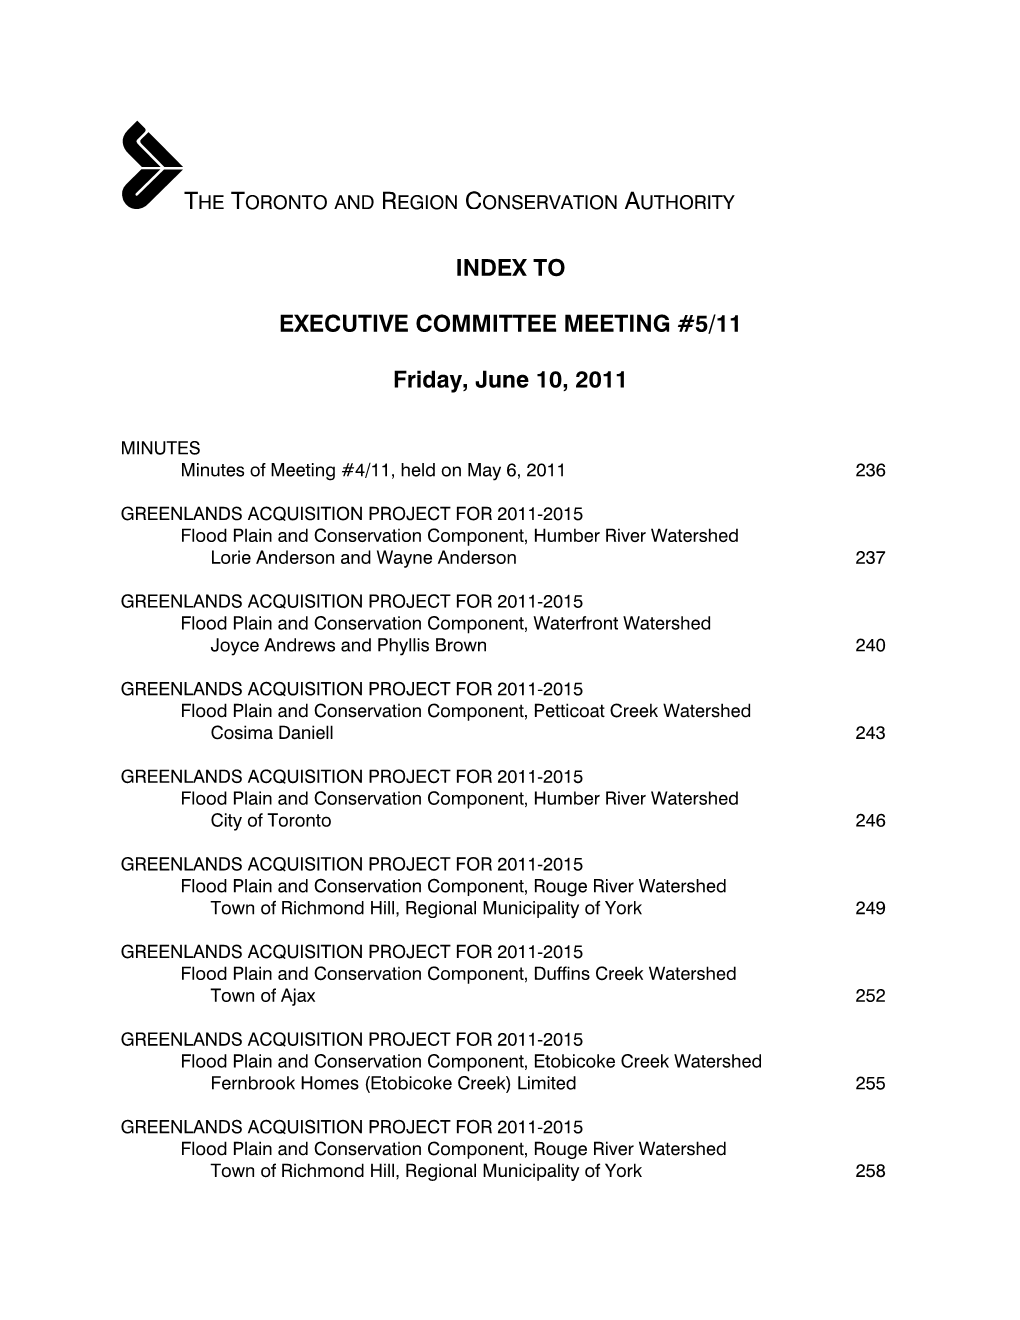 Executive Committee Meeting #5/11